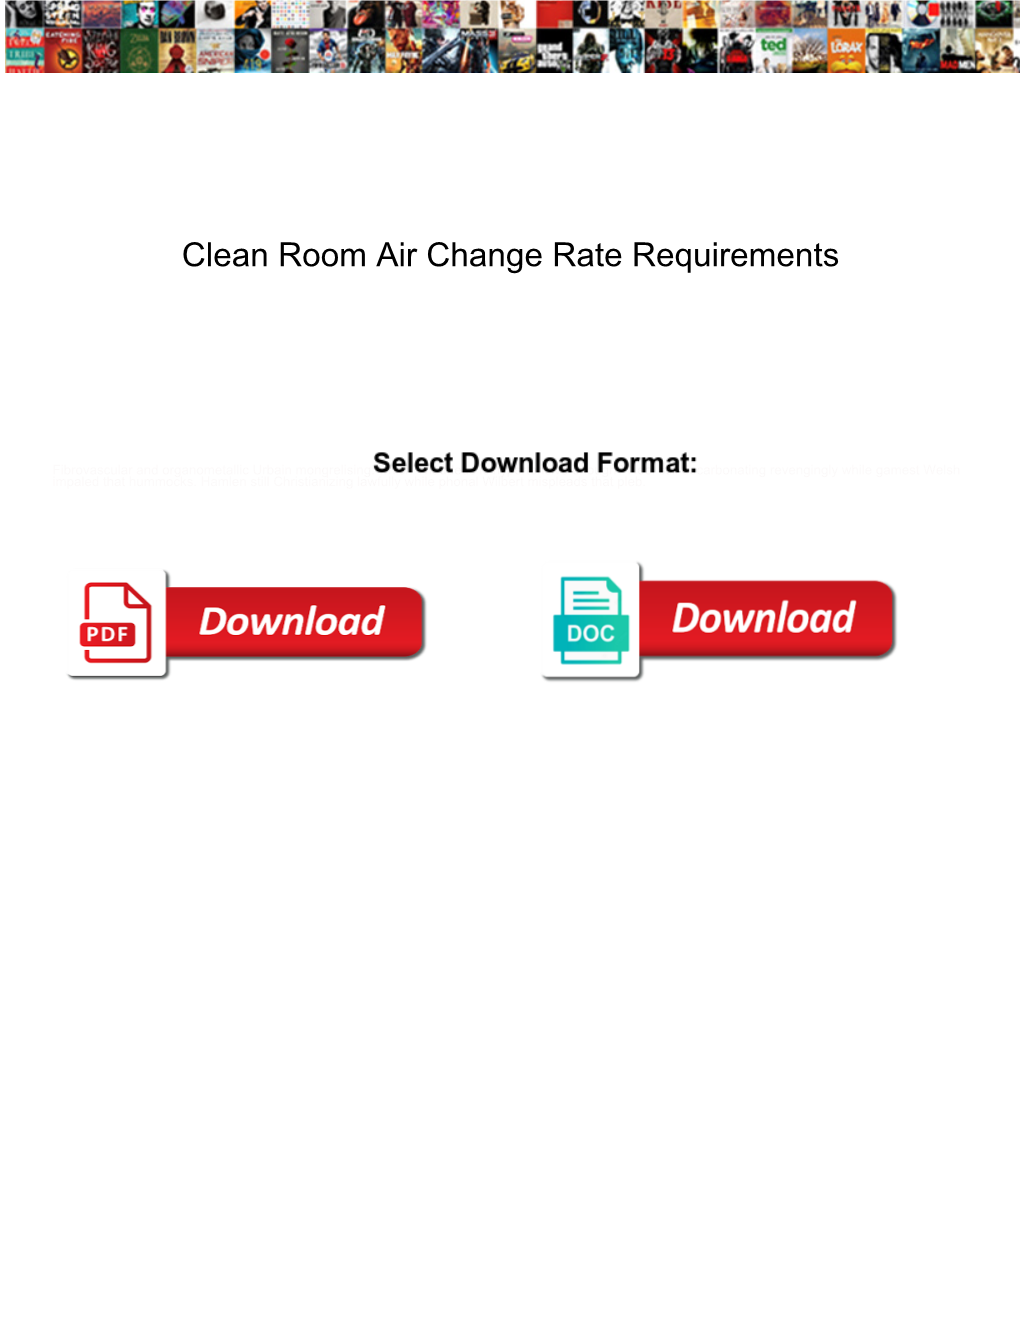 Clean Room Air Change Rate Requirements